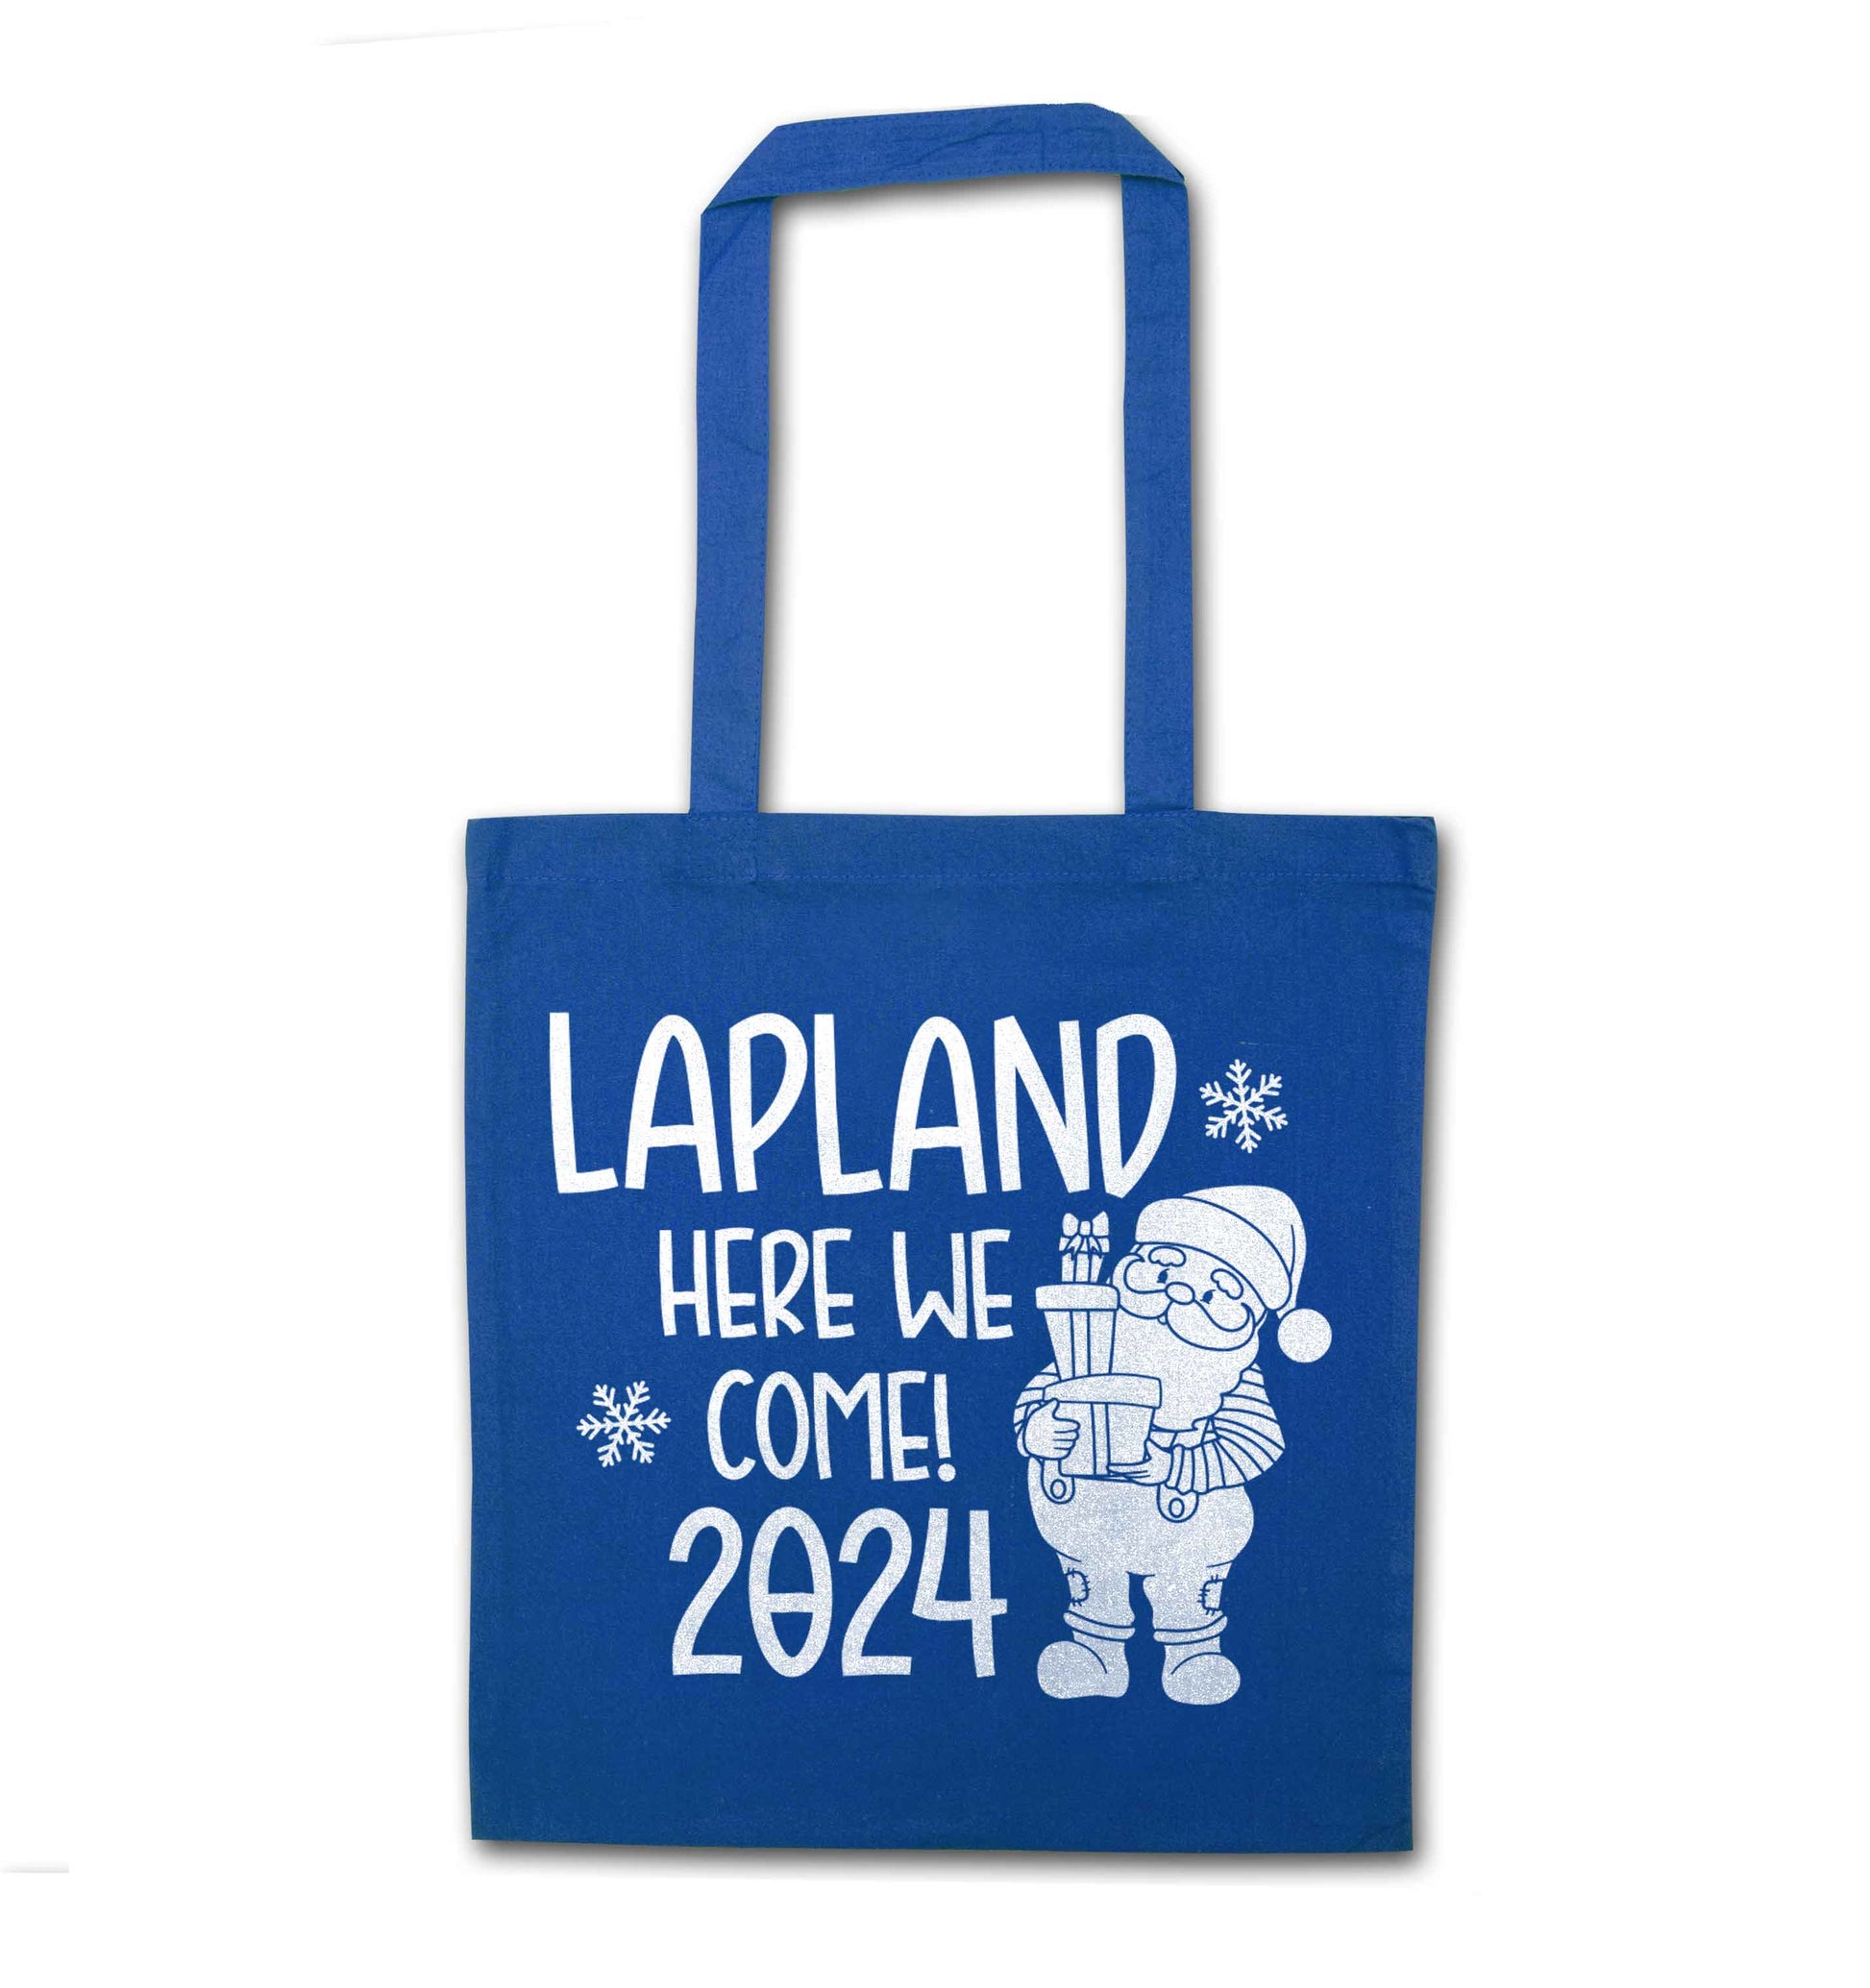 Lapland here we come blue tote bag